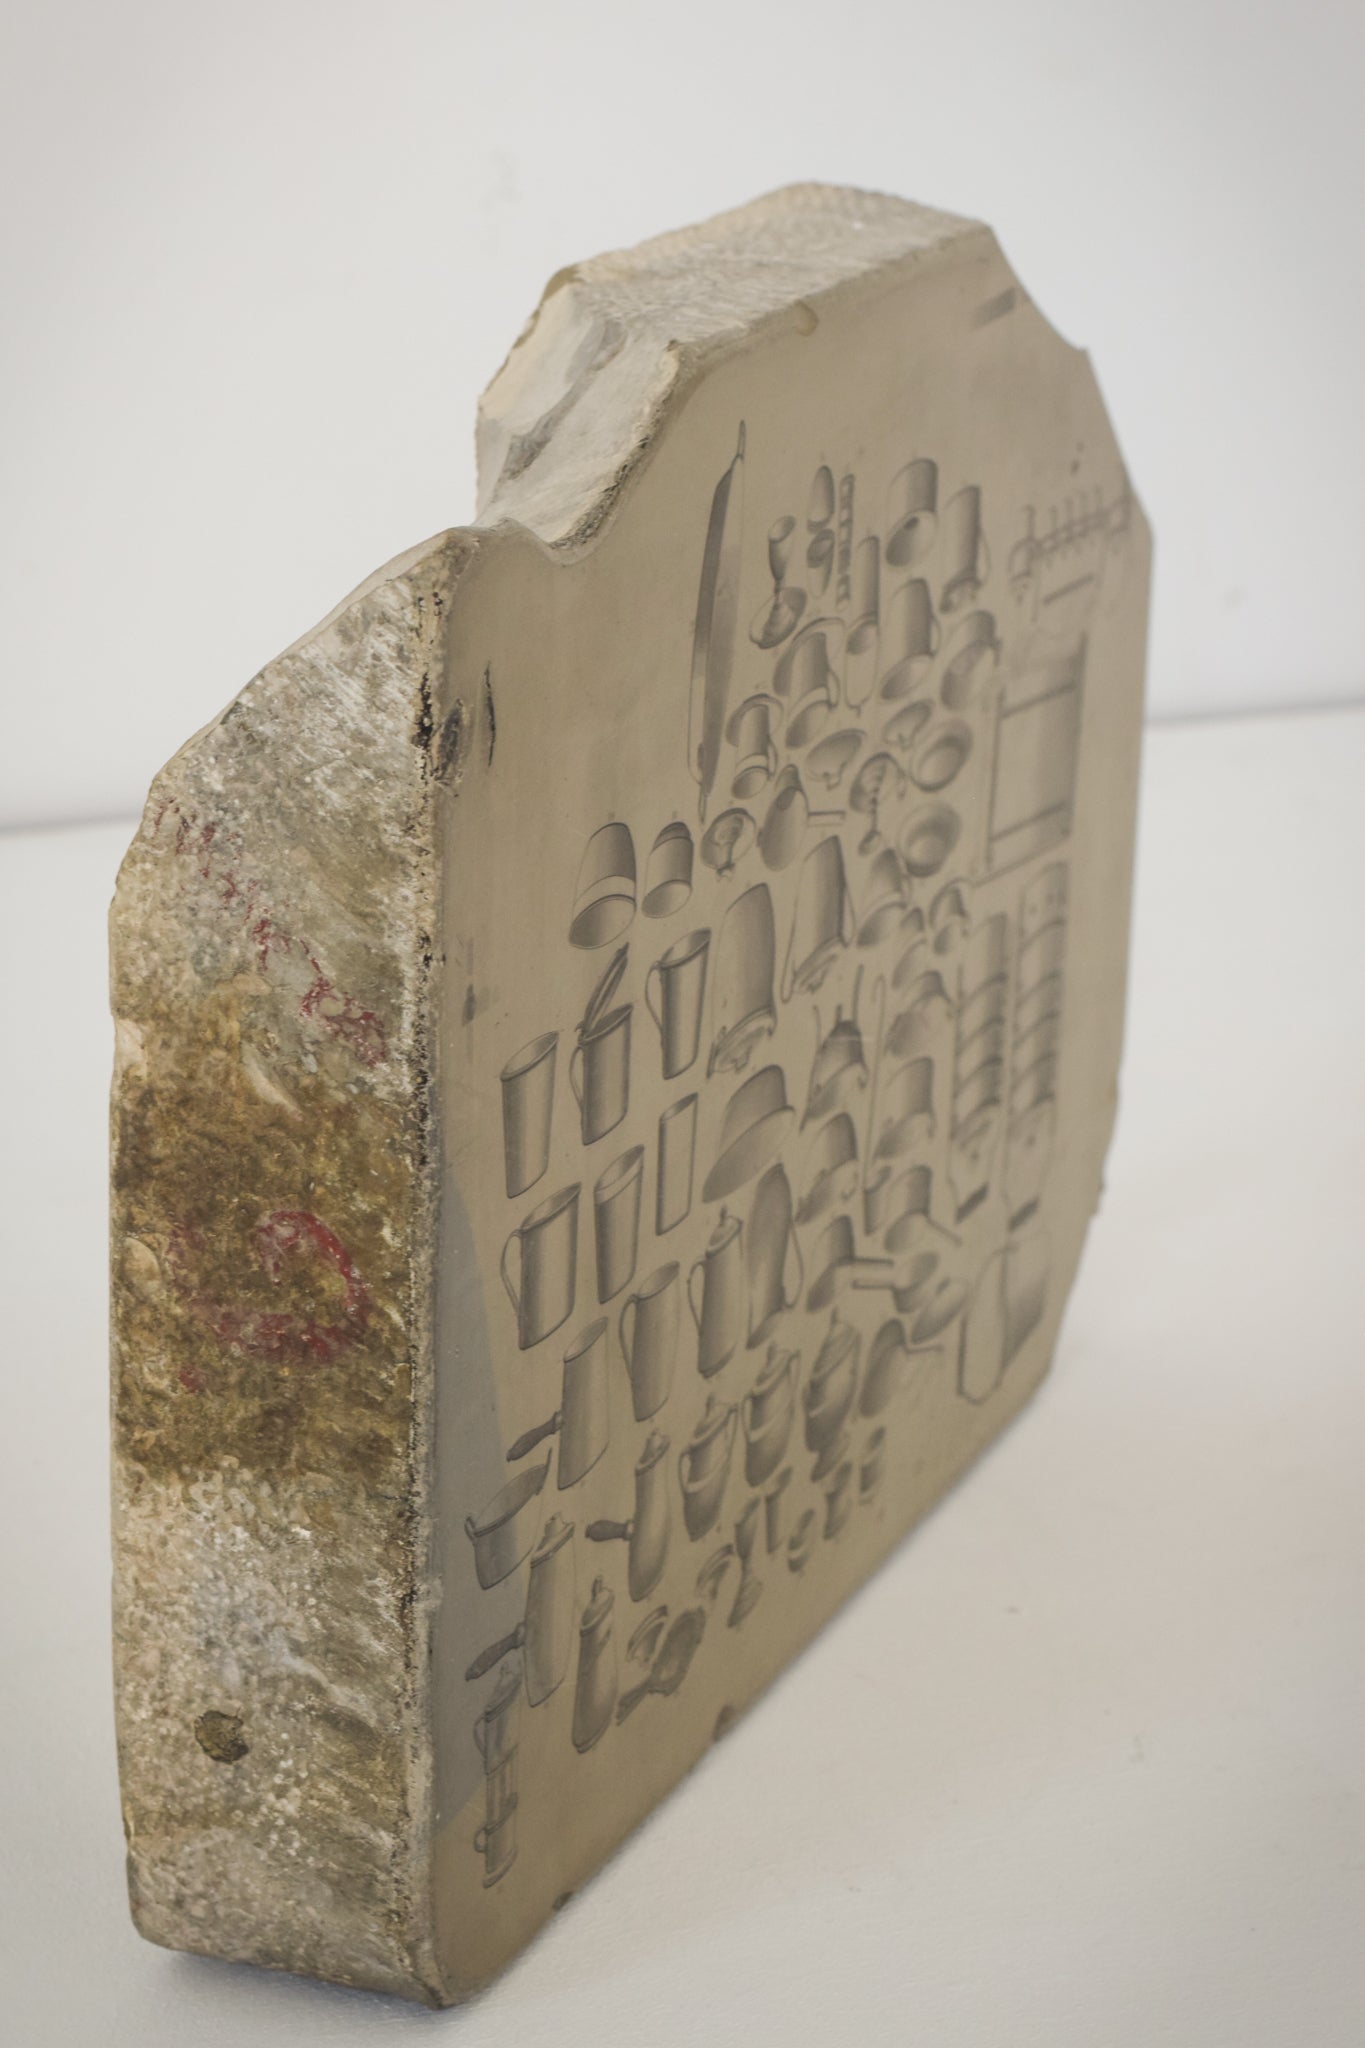 Lithographic Stone with drawings of Culinary Utensils as a design_Detail